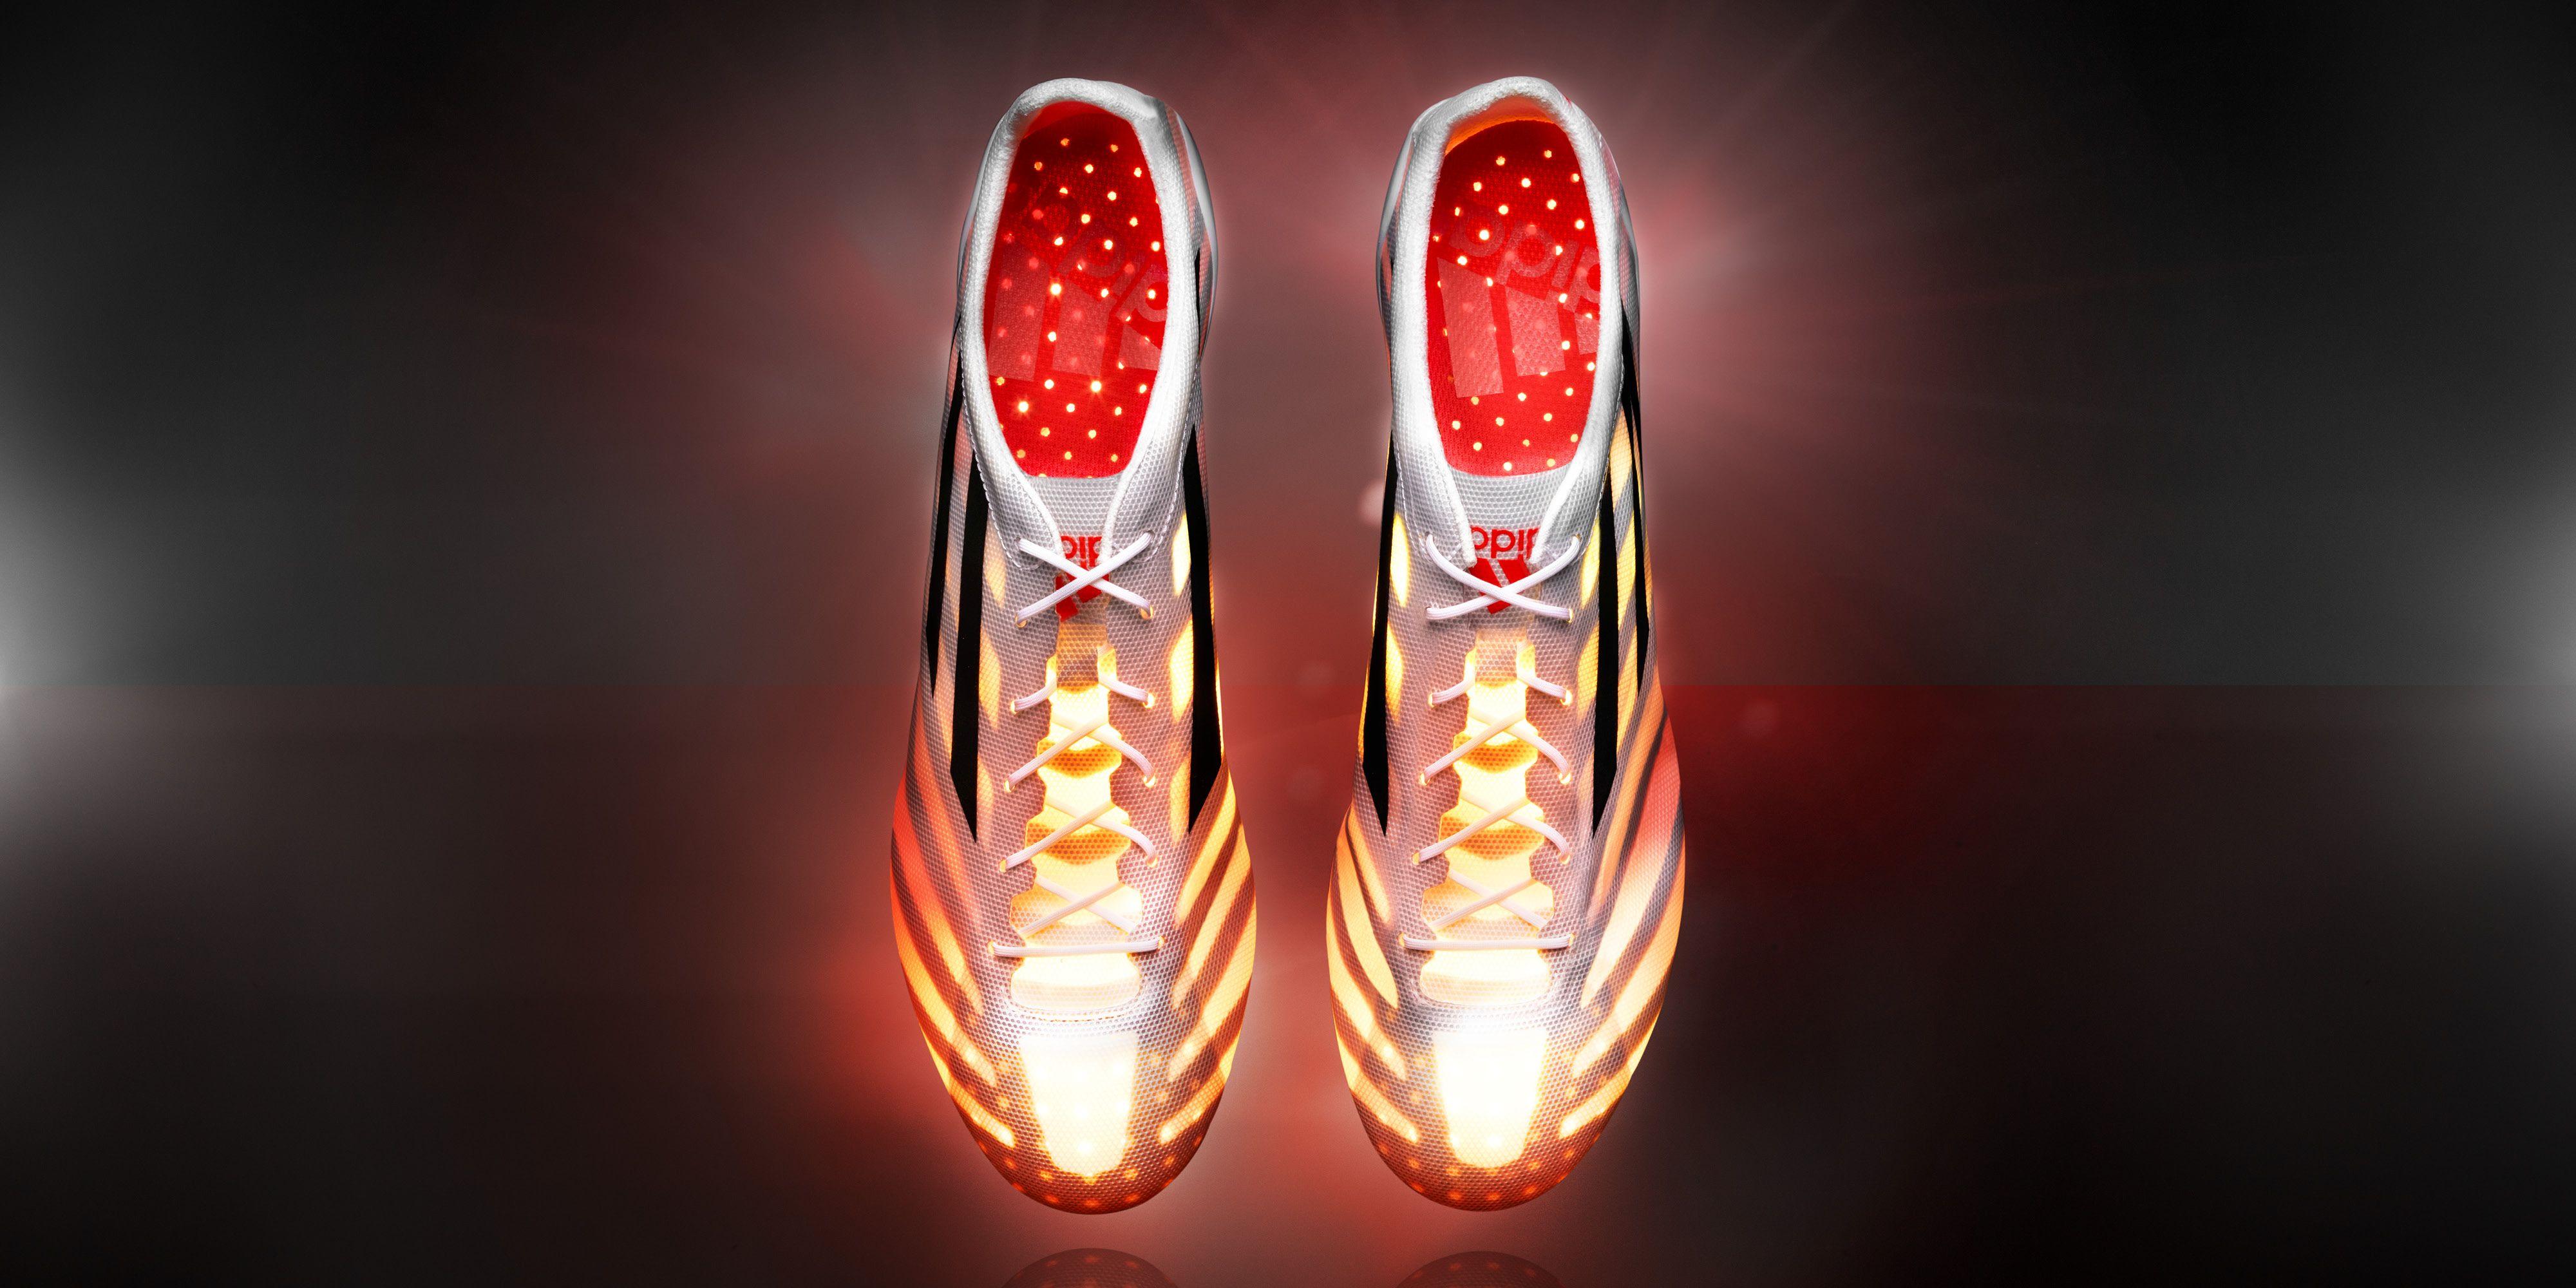 grams. Adidas launch the lightest boot ever made. The 12elfth Man